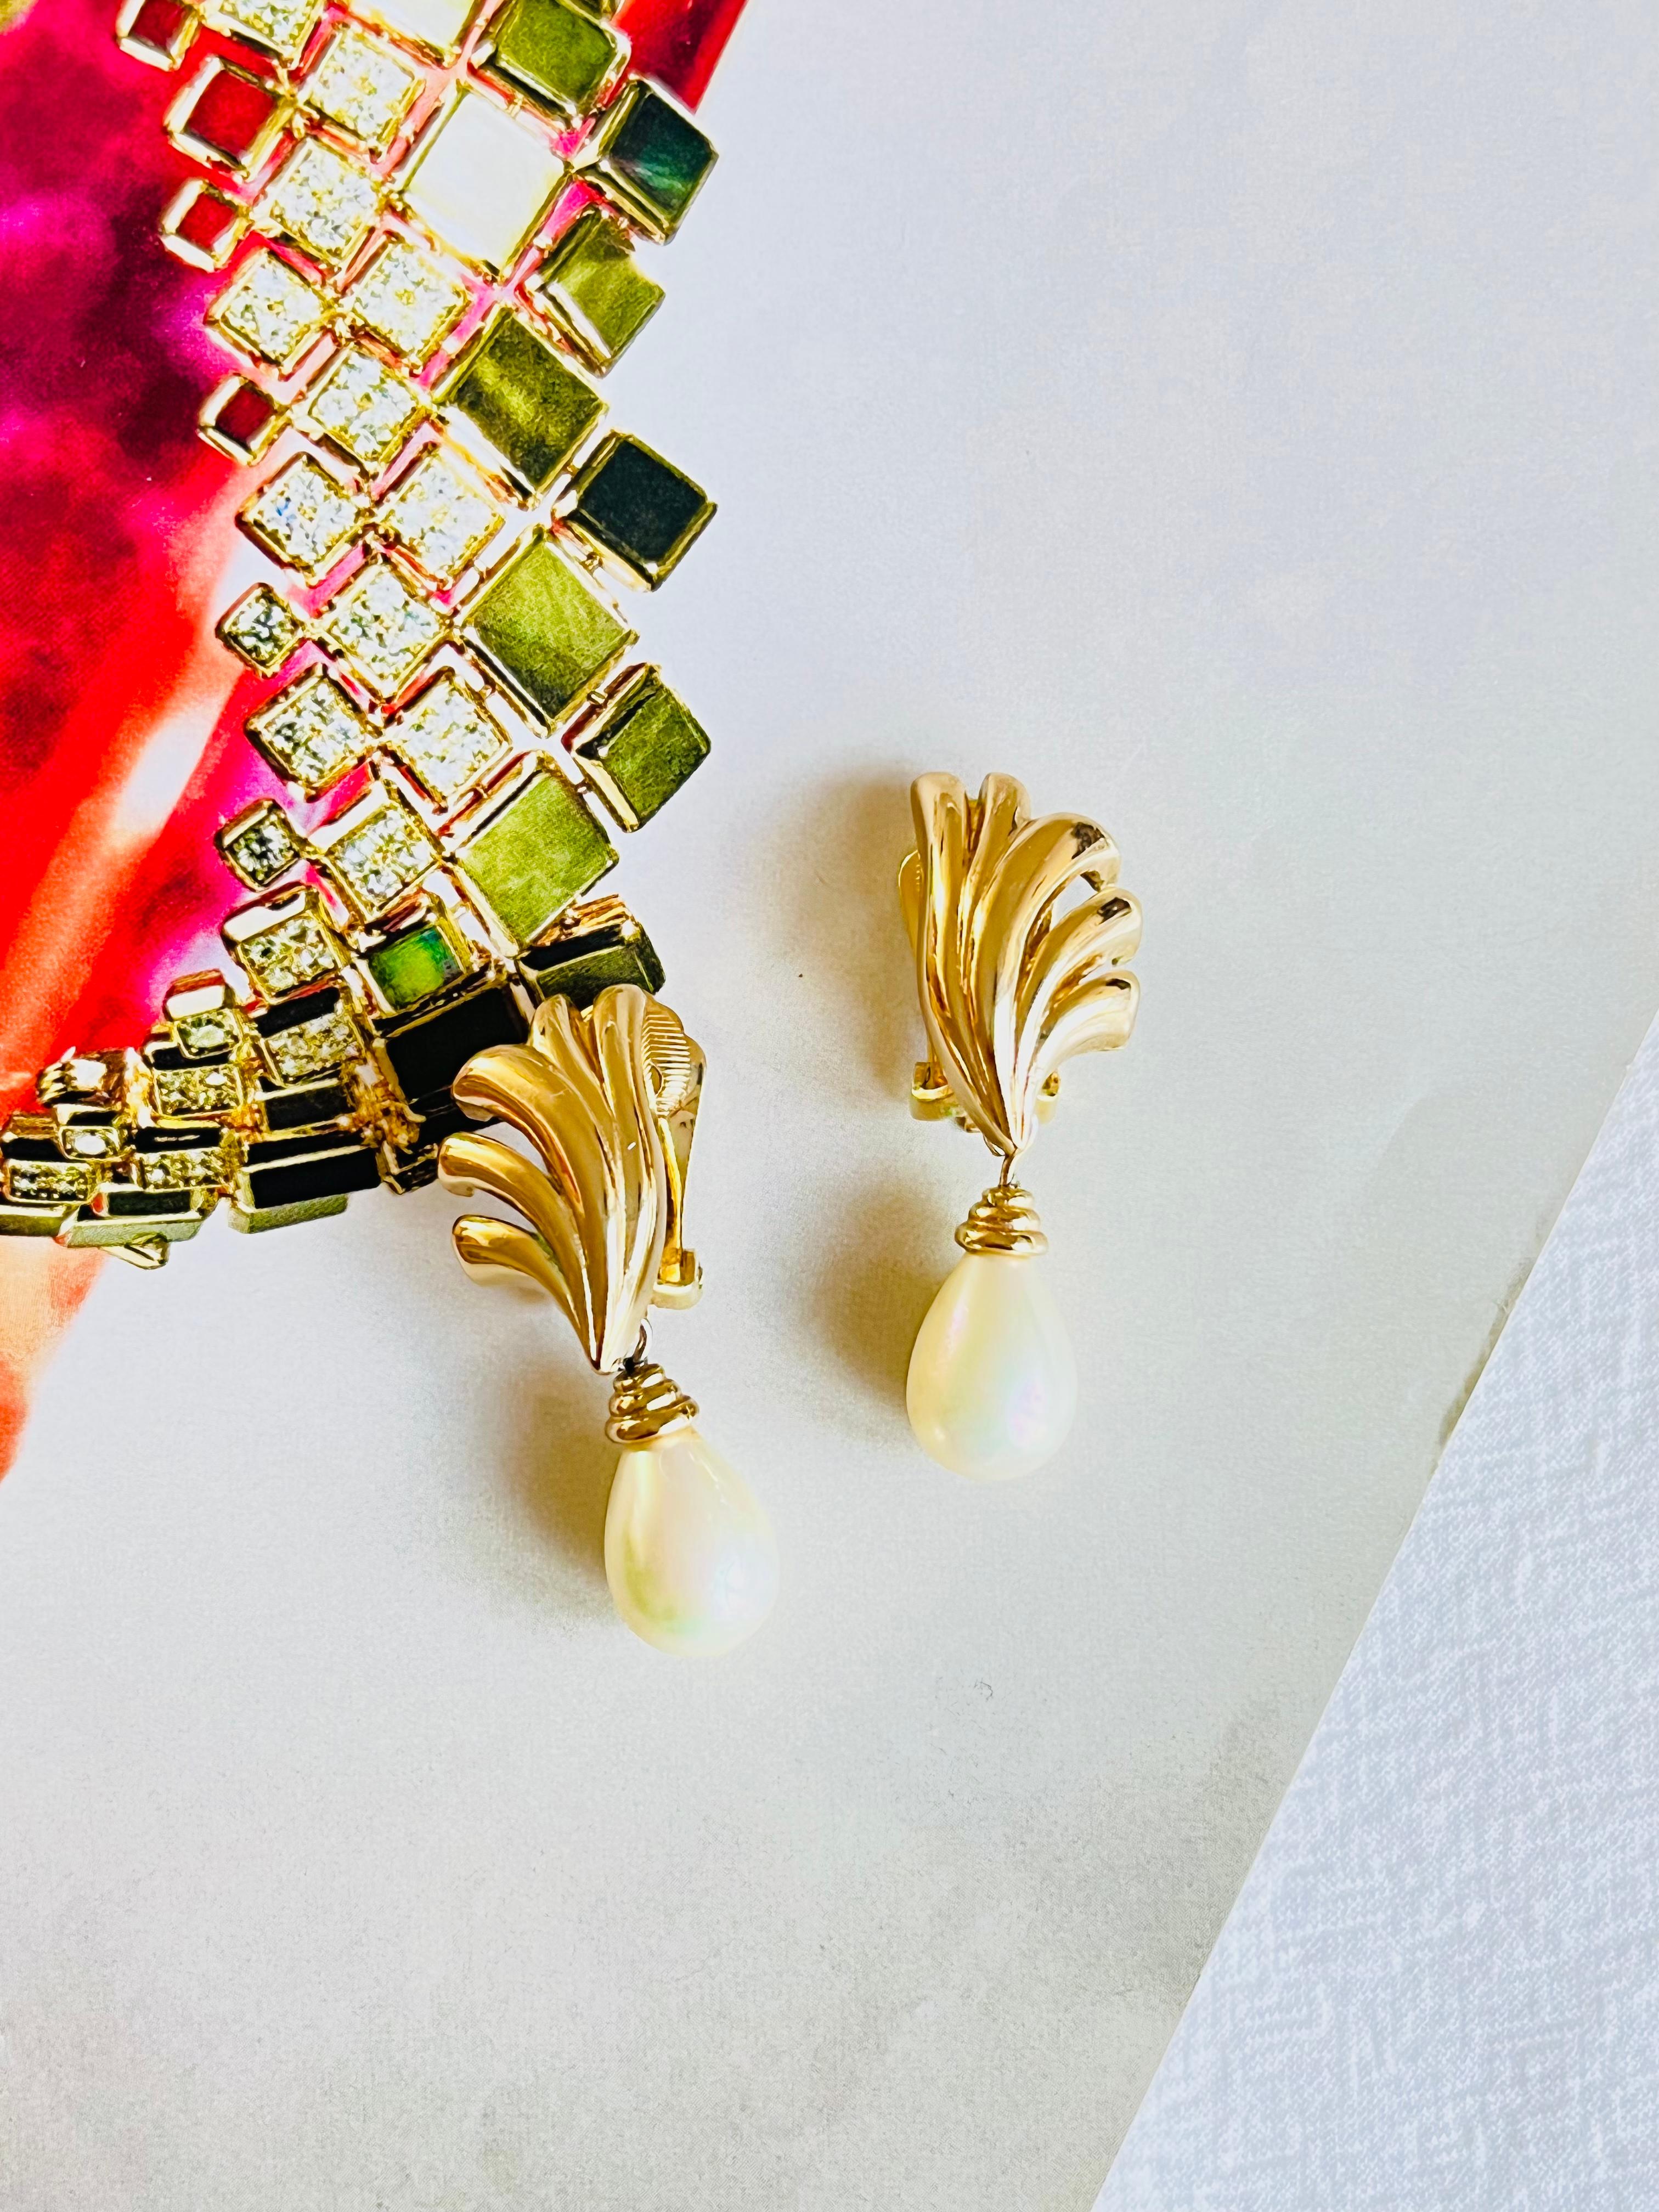 Very good condition. Not any colour loss.

Some light scratches, some peel off at pearls. 100% Genuine.

A very beautiful pair of earrings by Chr. DIOR, signed at the back.

Size: 4.0*1.5 cm.

Weight: 9.0 g/each.

_ _ _

Great for everyday wear.